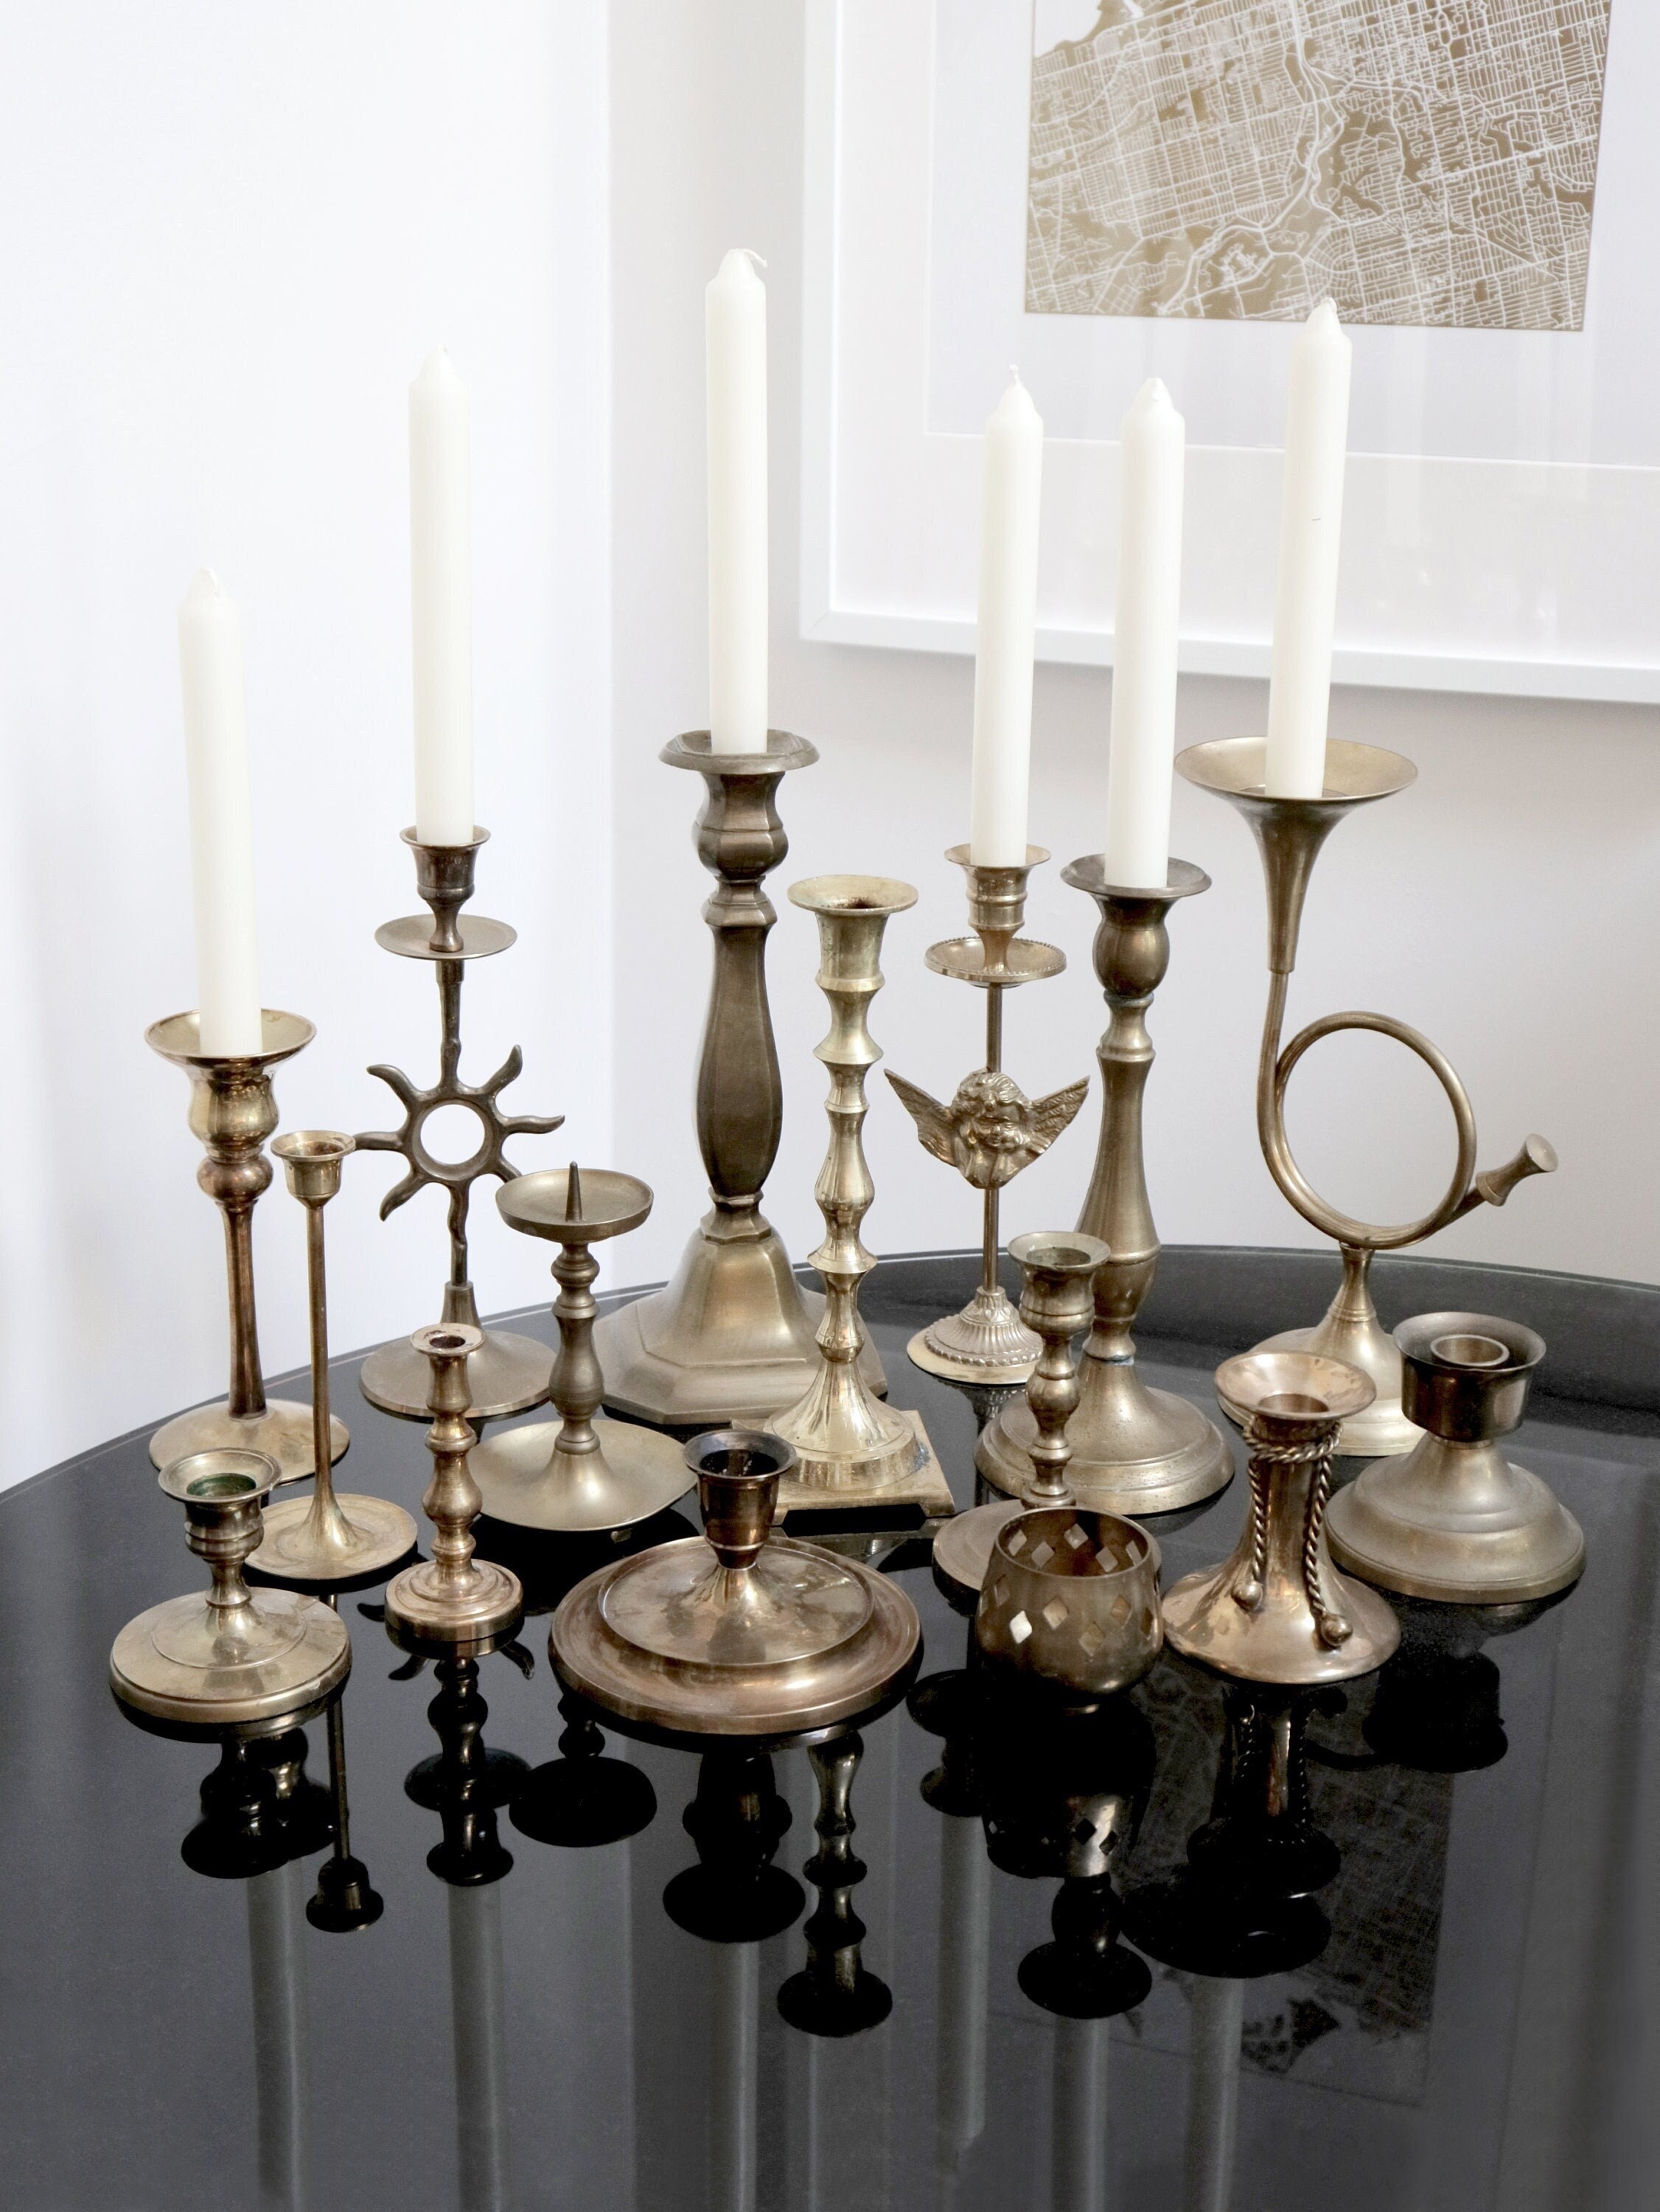 CHOICE Vintage Single Brass Candlesticks, Individual Candle Holders,  Bohemian Wedding Decor, Solid Gold Tone Metal, Centrepiece Display 